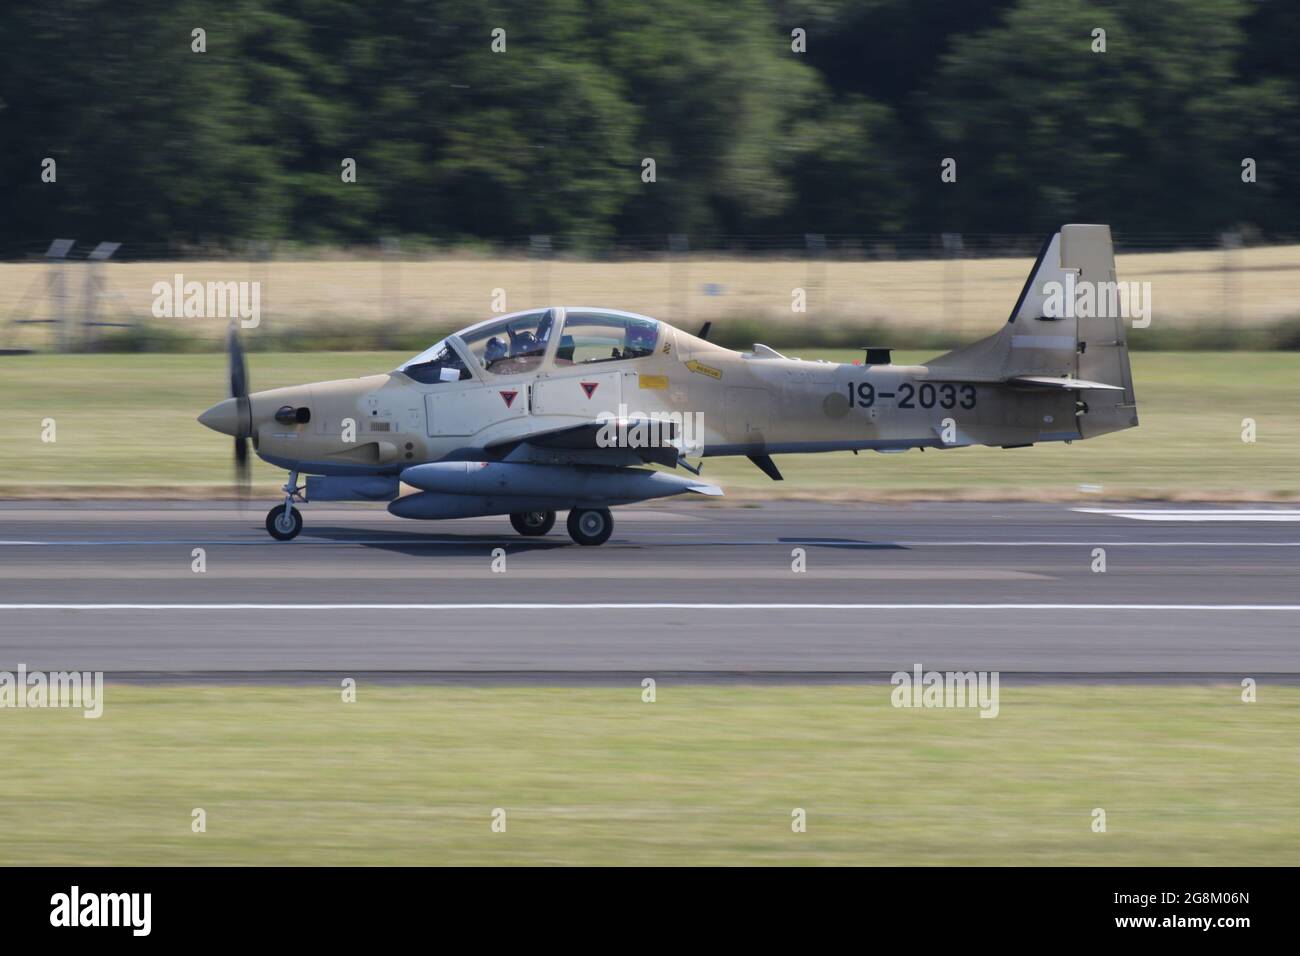 One of six Embraer A-29B Super Tucanos destined for the Nigerian Air Force (NAF), on departure from Prestwick International Airport on 20 July 2021. The aircraft was on a delivery flight from the USA to Nigeria, and wore a temporary US military serial (19-2033) for the flight. This particular airframe will become NAF845 in Nigerian Air Force service. Stock Photo